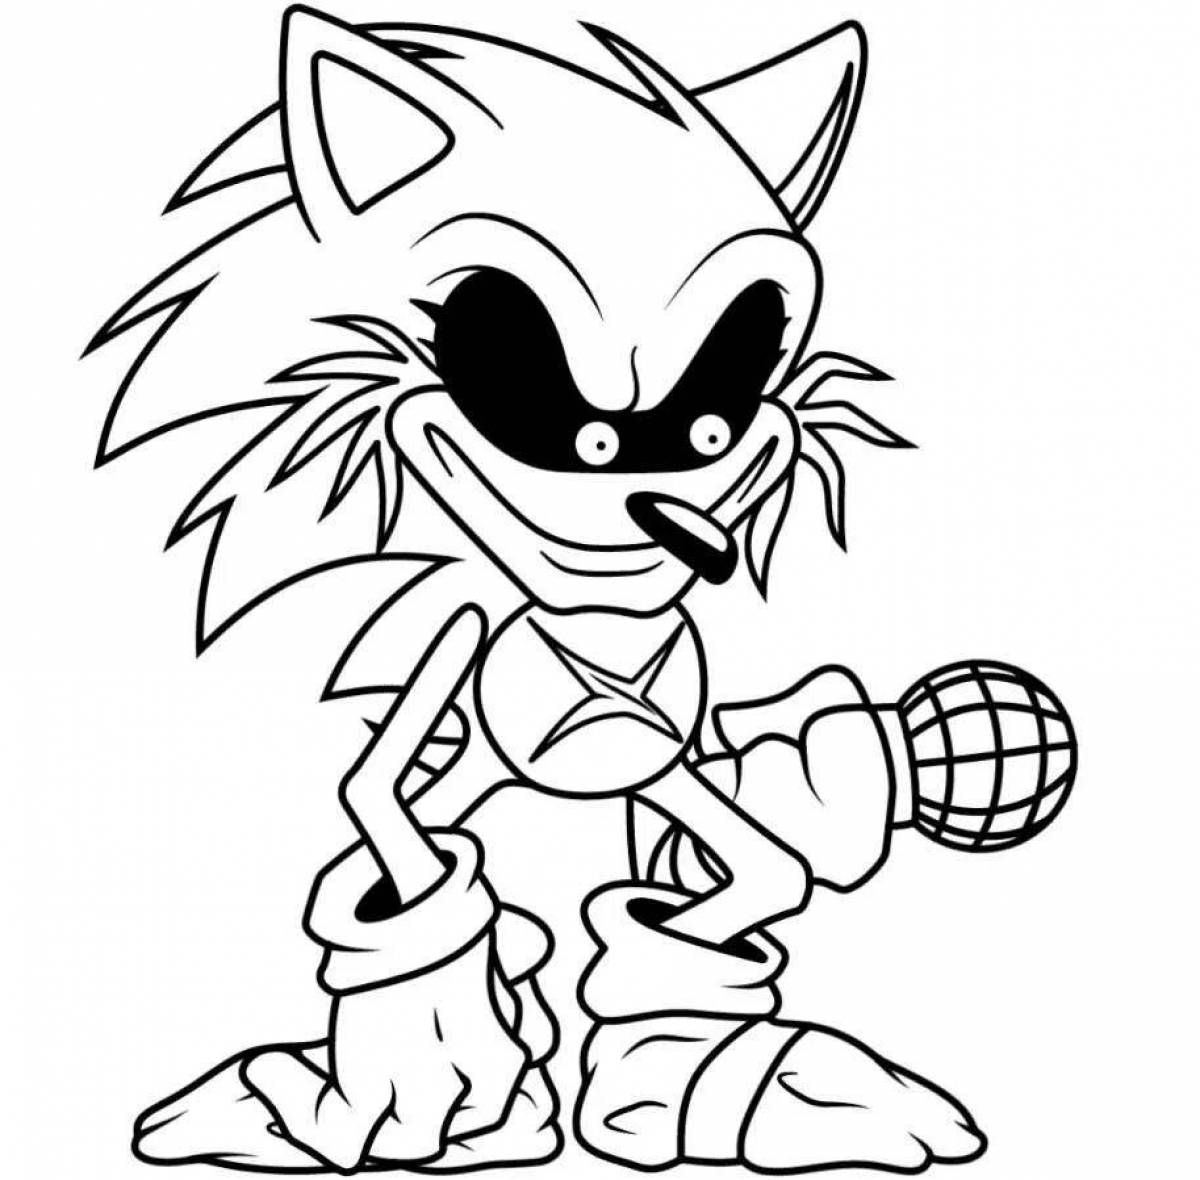 Sonicexe fnf amazing coloring book